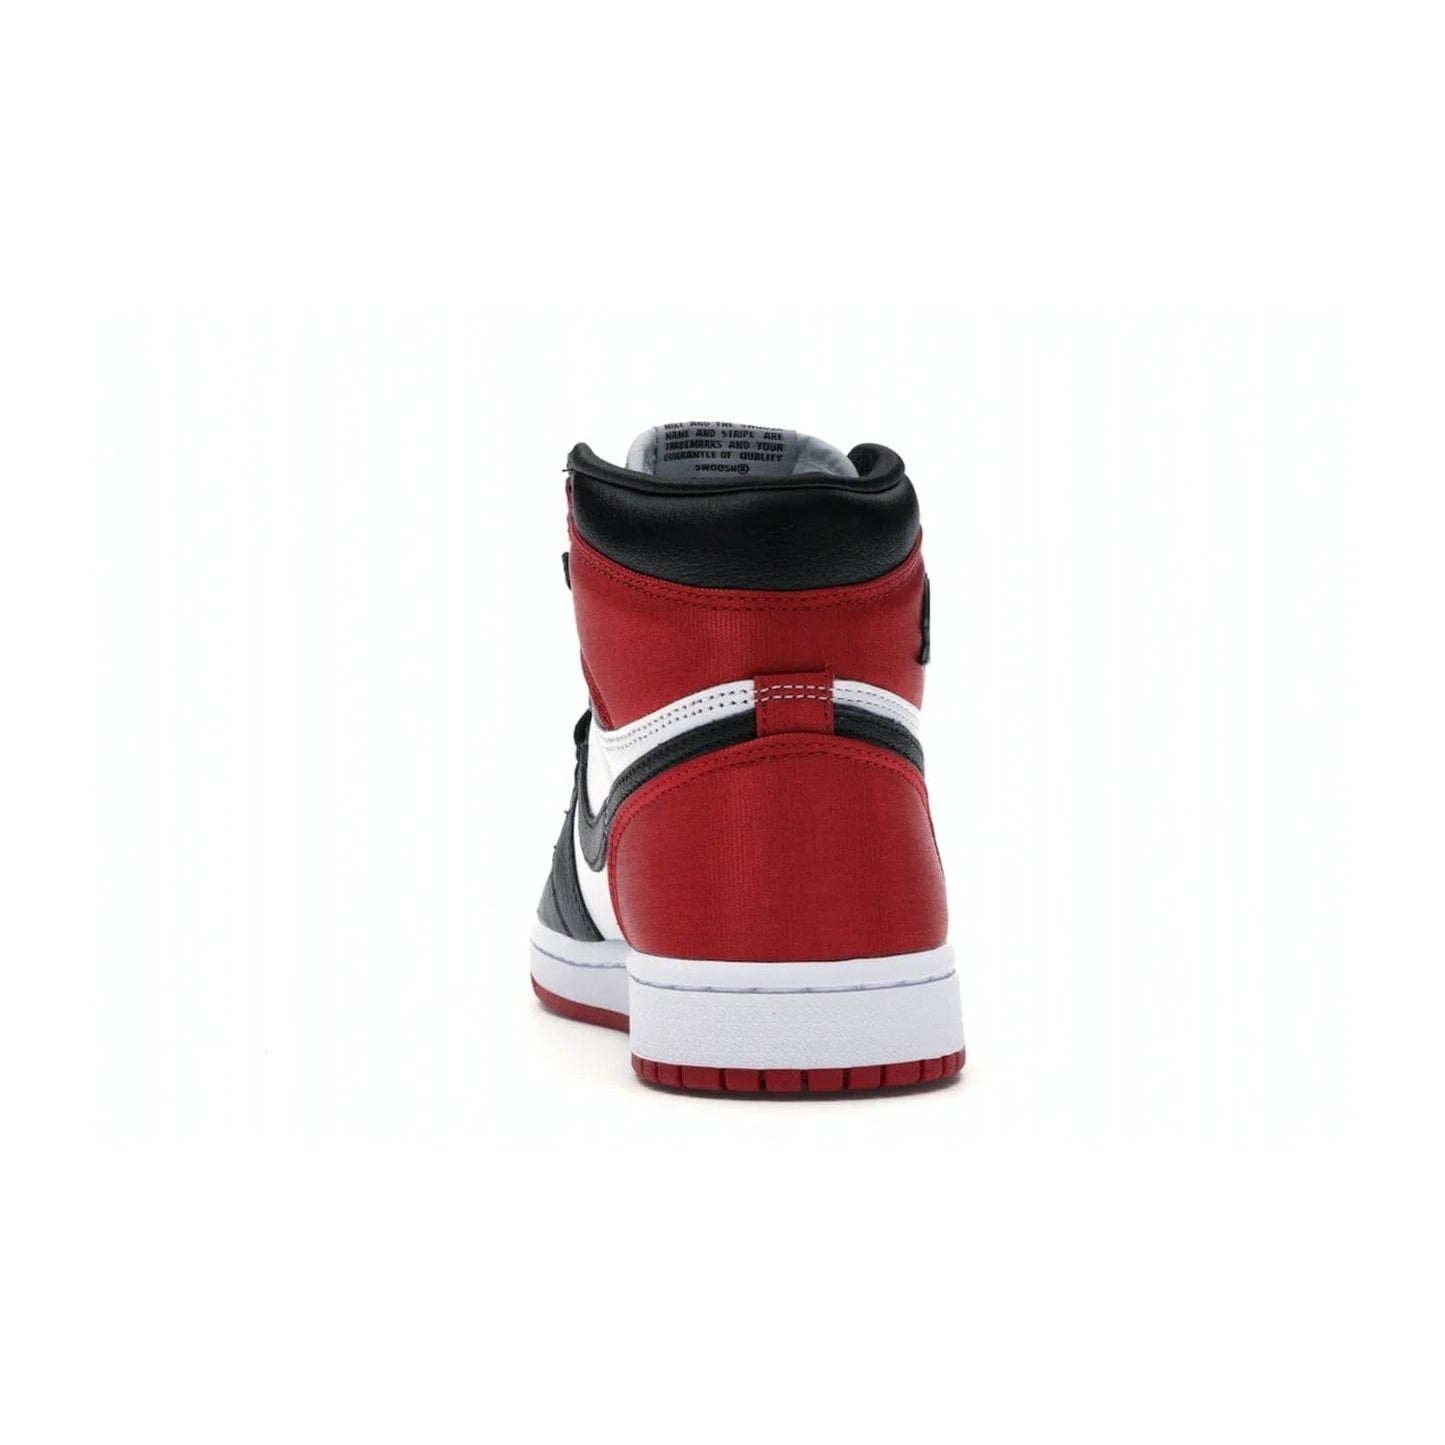 Jordan 1 Retro High Satin Black Toe (Women's) - Image 27 - Only at www.BallersClubKickz.com - Luxurious take on the timeless Air Jordan 1. Features a mix of black leather and satin materials with subtle University Red accents. Elevated look with metal Wings logo on the heel. Released in August 2019.